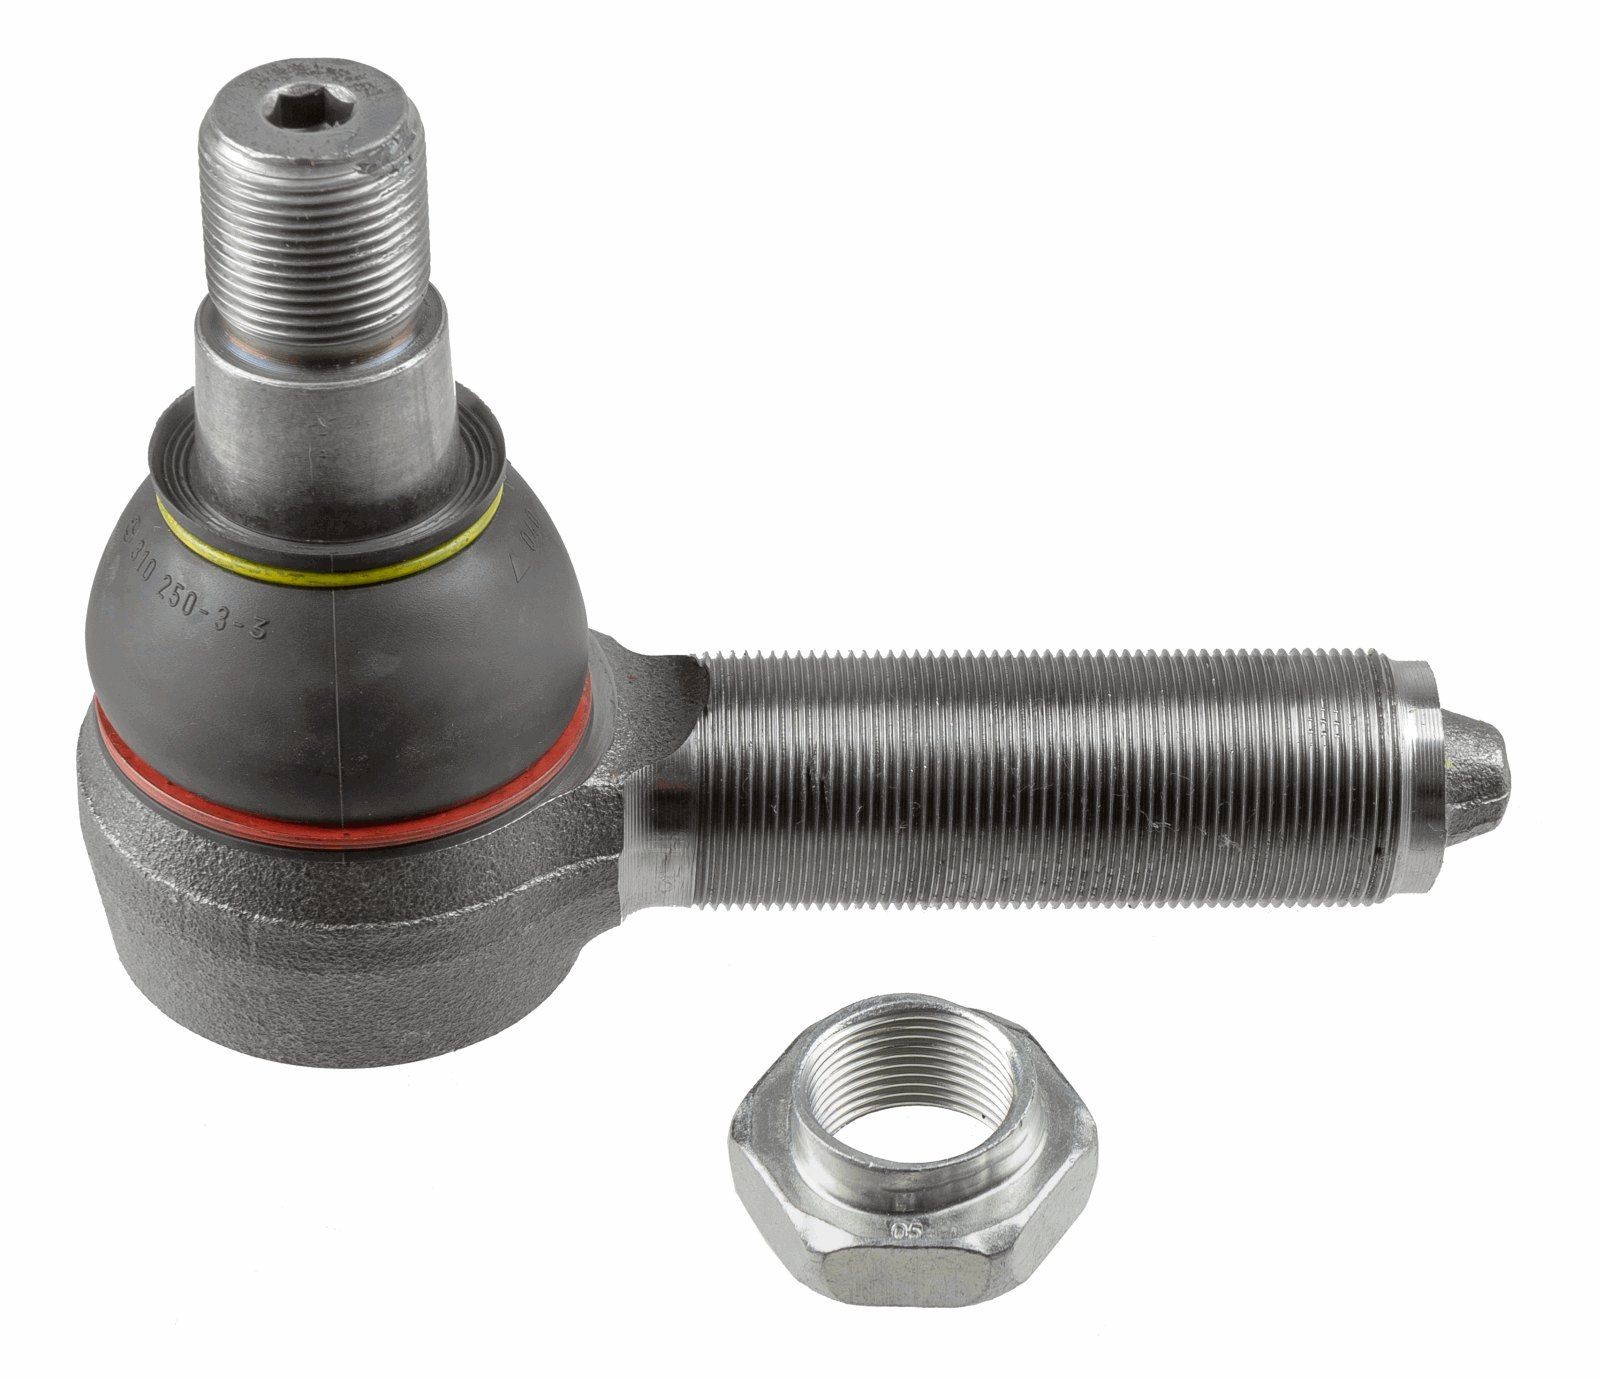 C:30/TH:M30x1,5L/L:120 LEMFÖRDER Cone Size 30 mm, M30x1,5 mm, with accessories Cone Size: 30mm, Thread Type: with left-hand thread Tie rod end 11492 03 buy